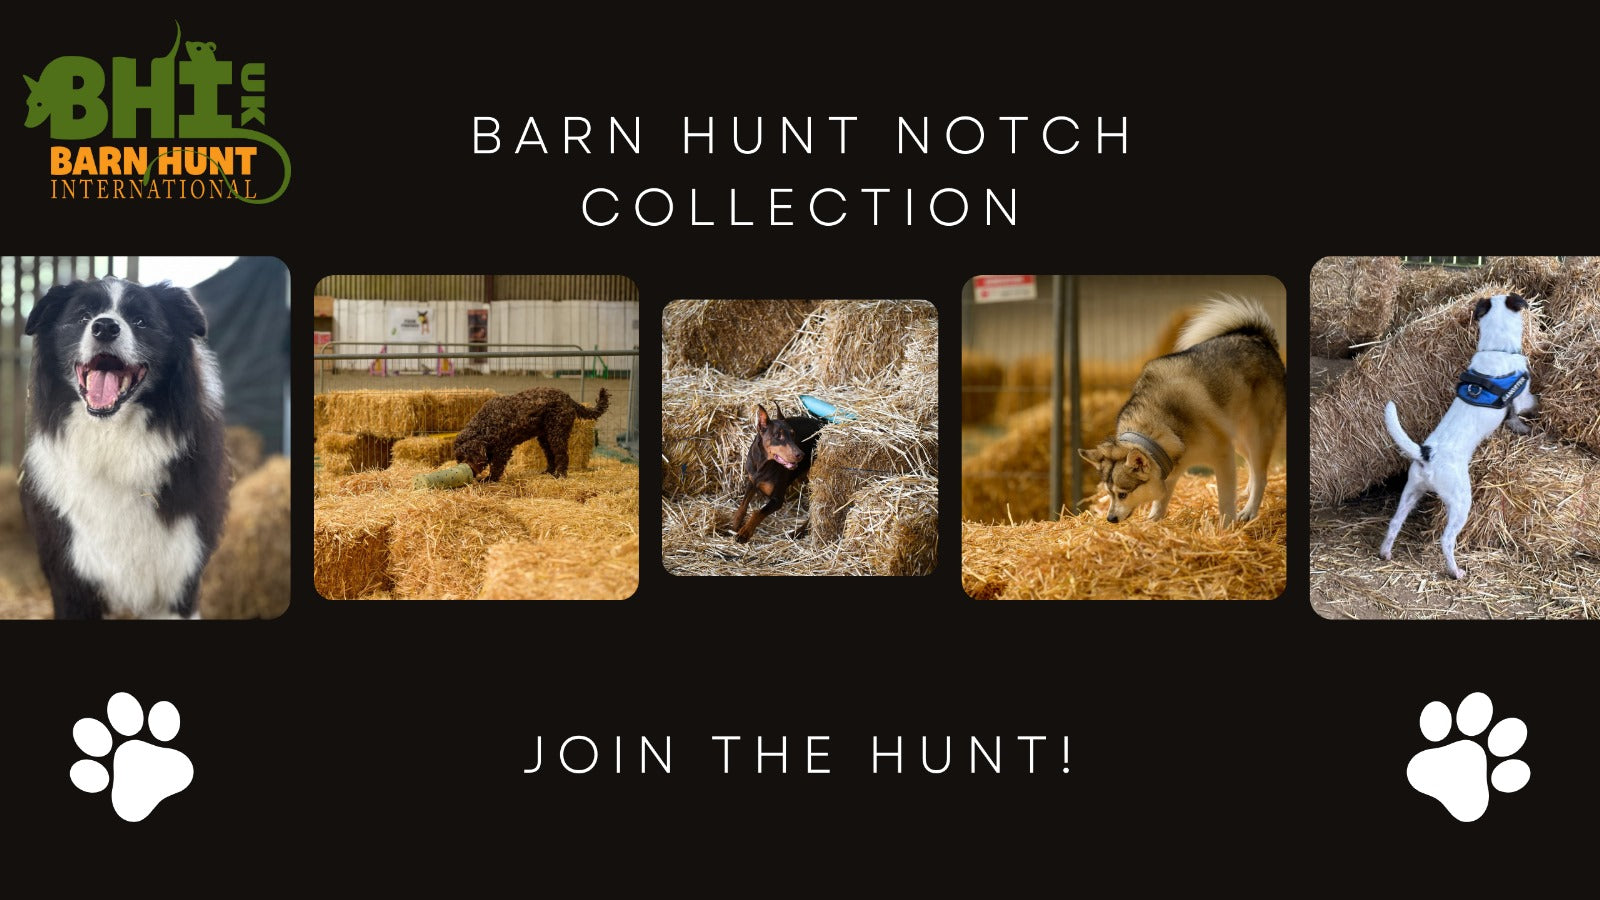 Barn Hunt NOTCH Collection